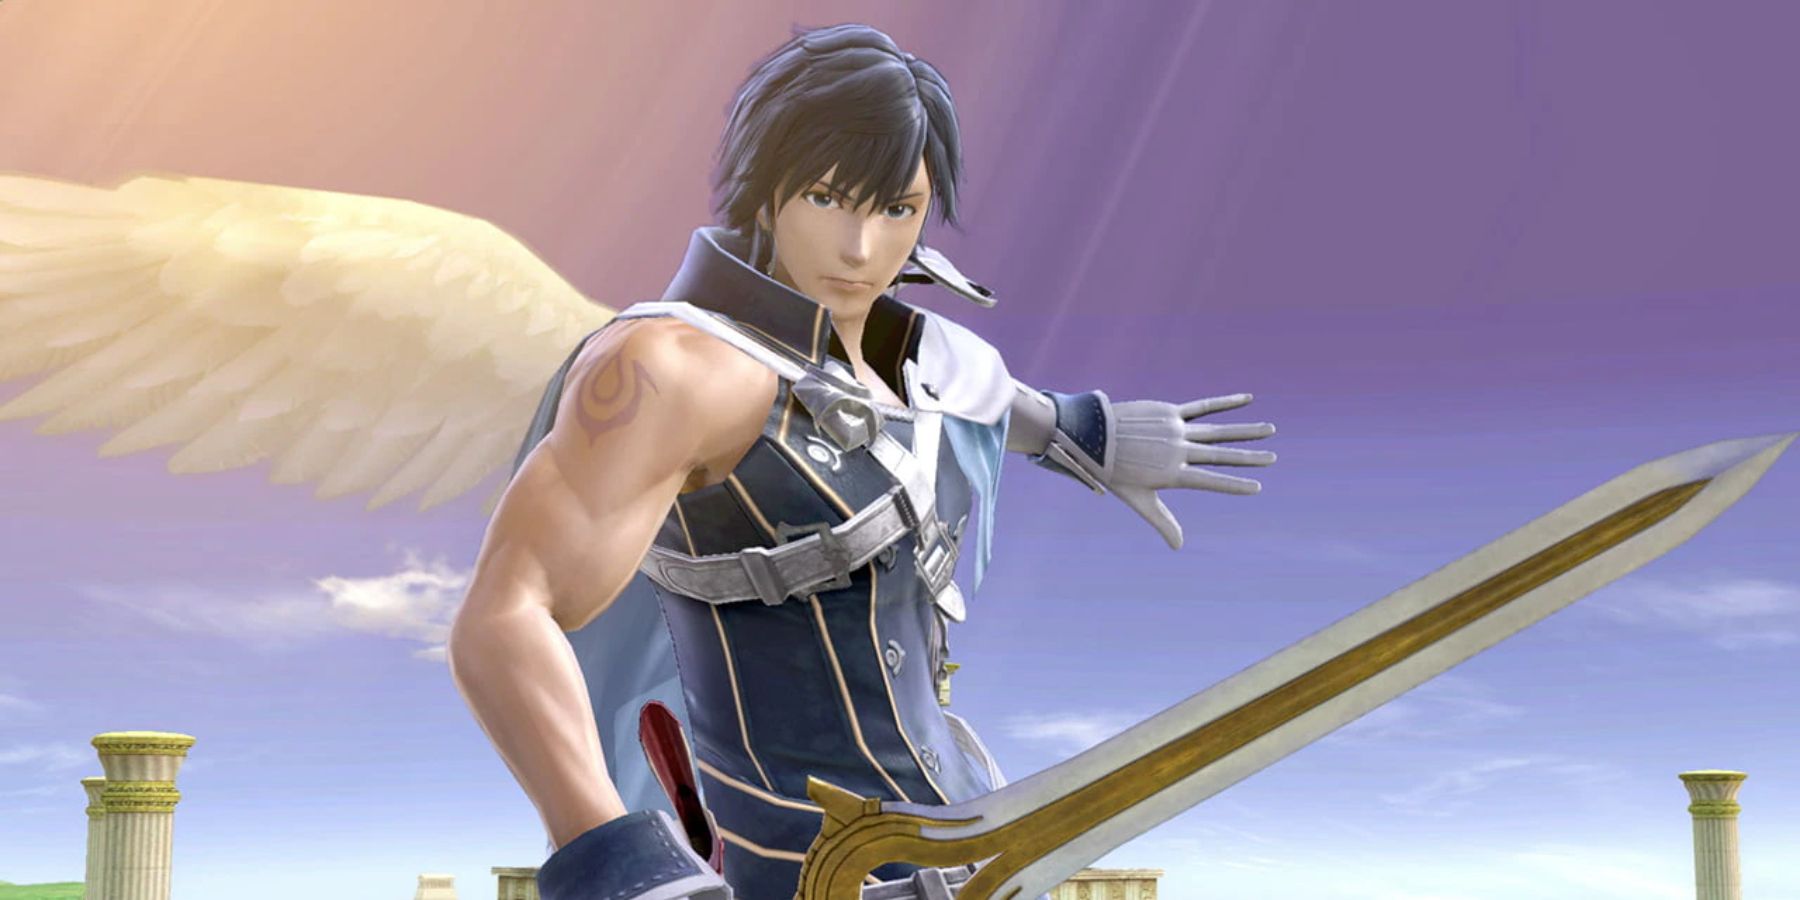 Super Smash Bros Every Fire Emblem Character Ranked